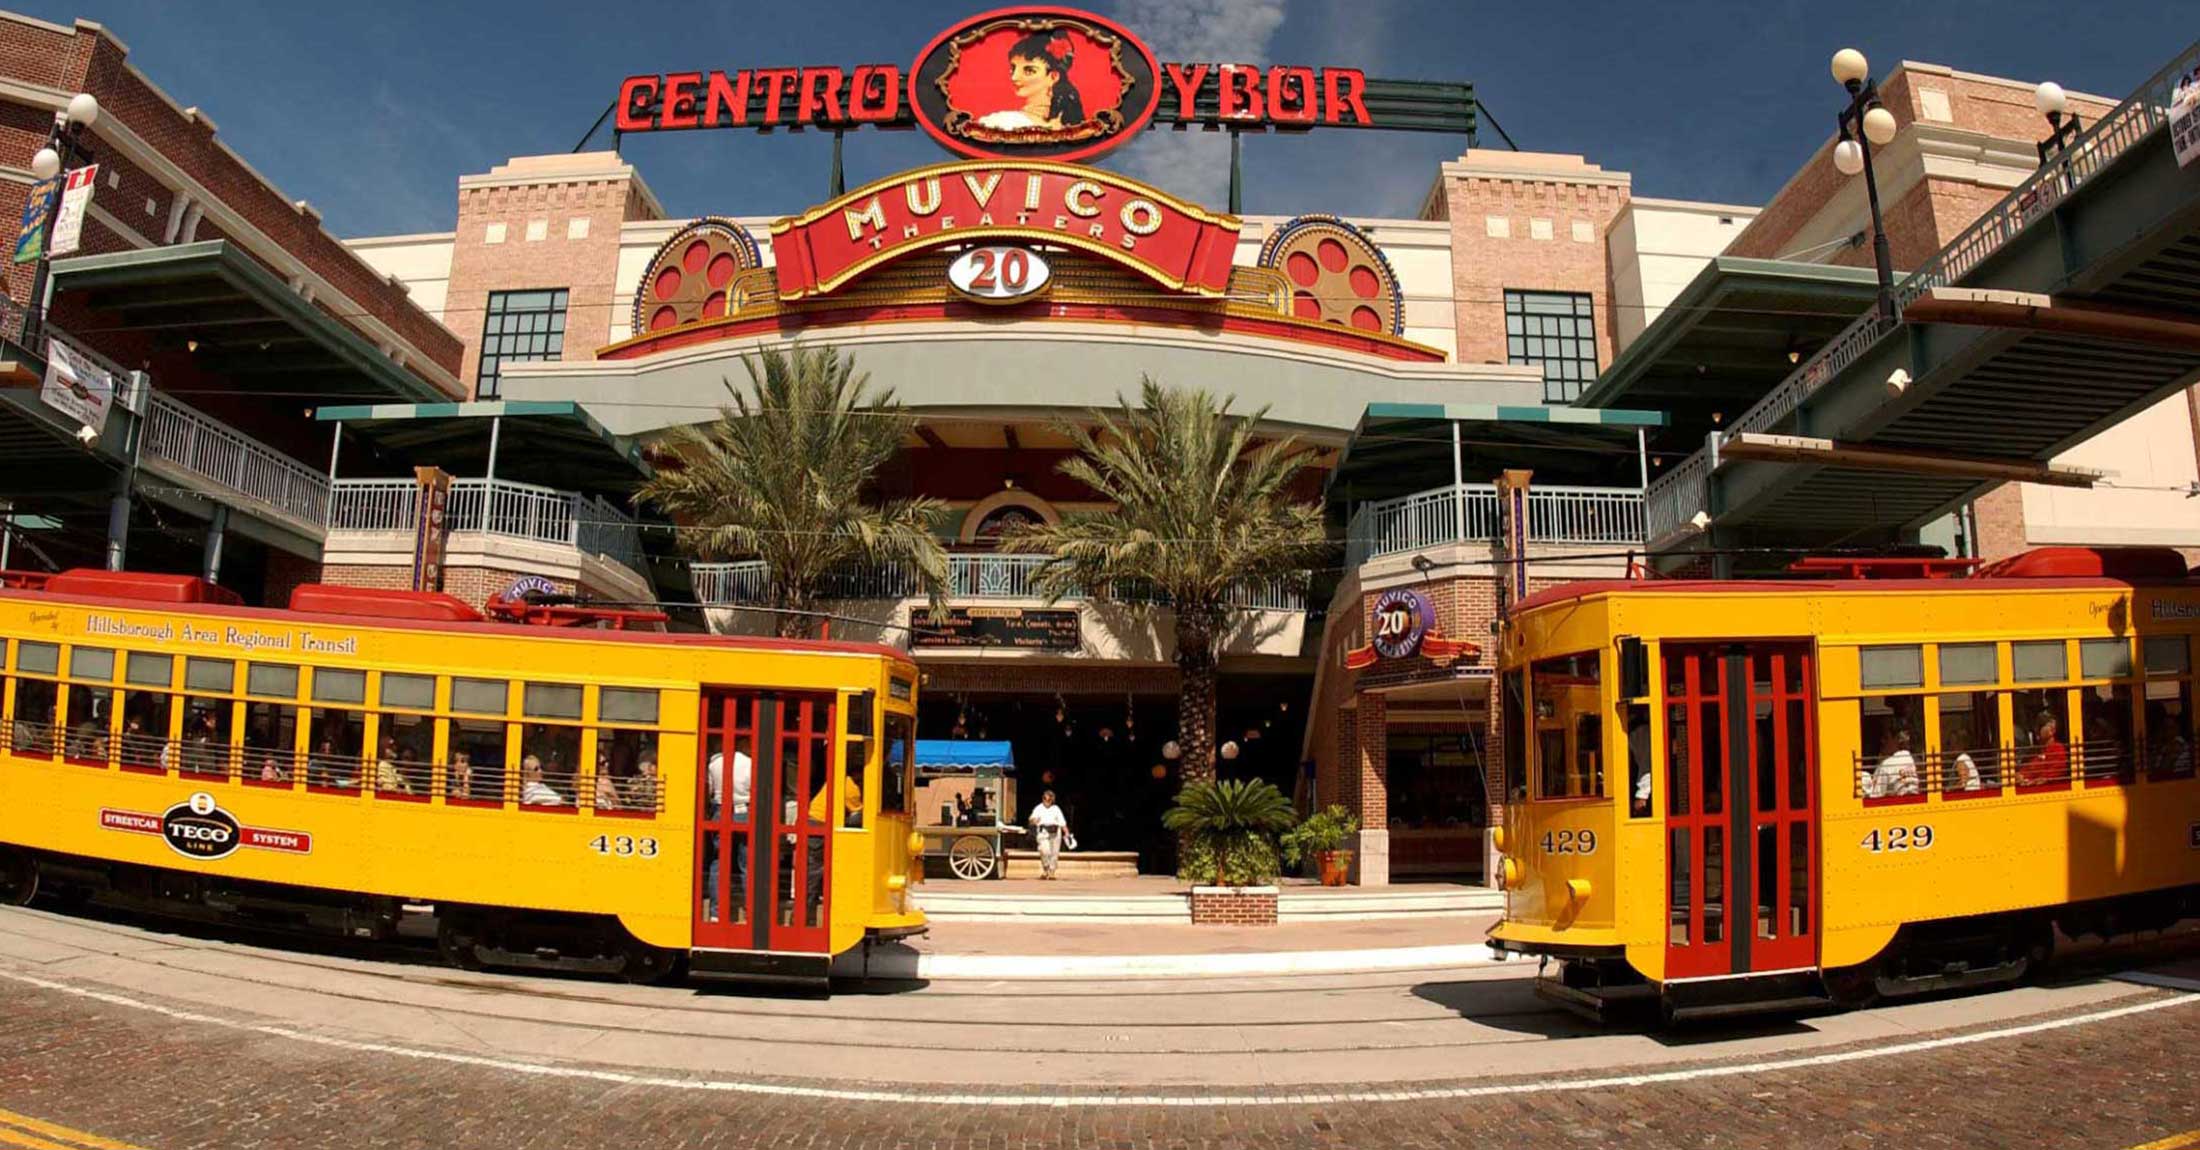 two street cars passing each other underneath the iconic centro ybor sign